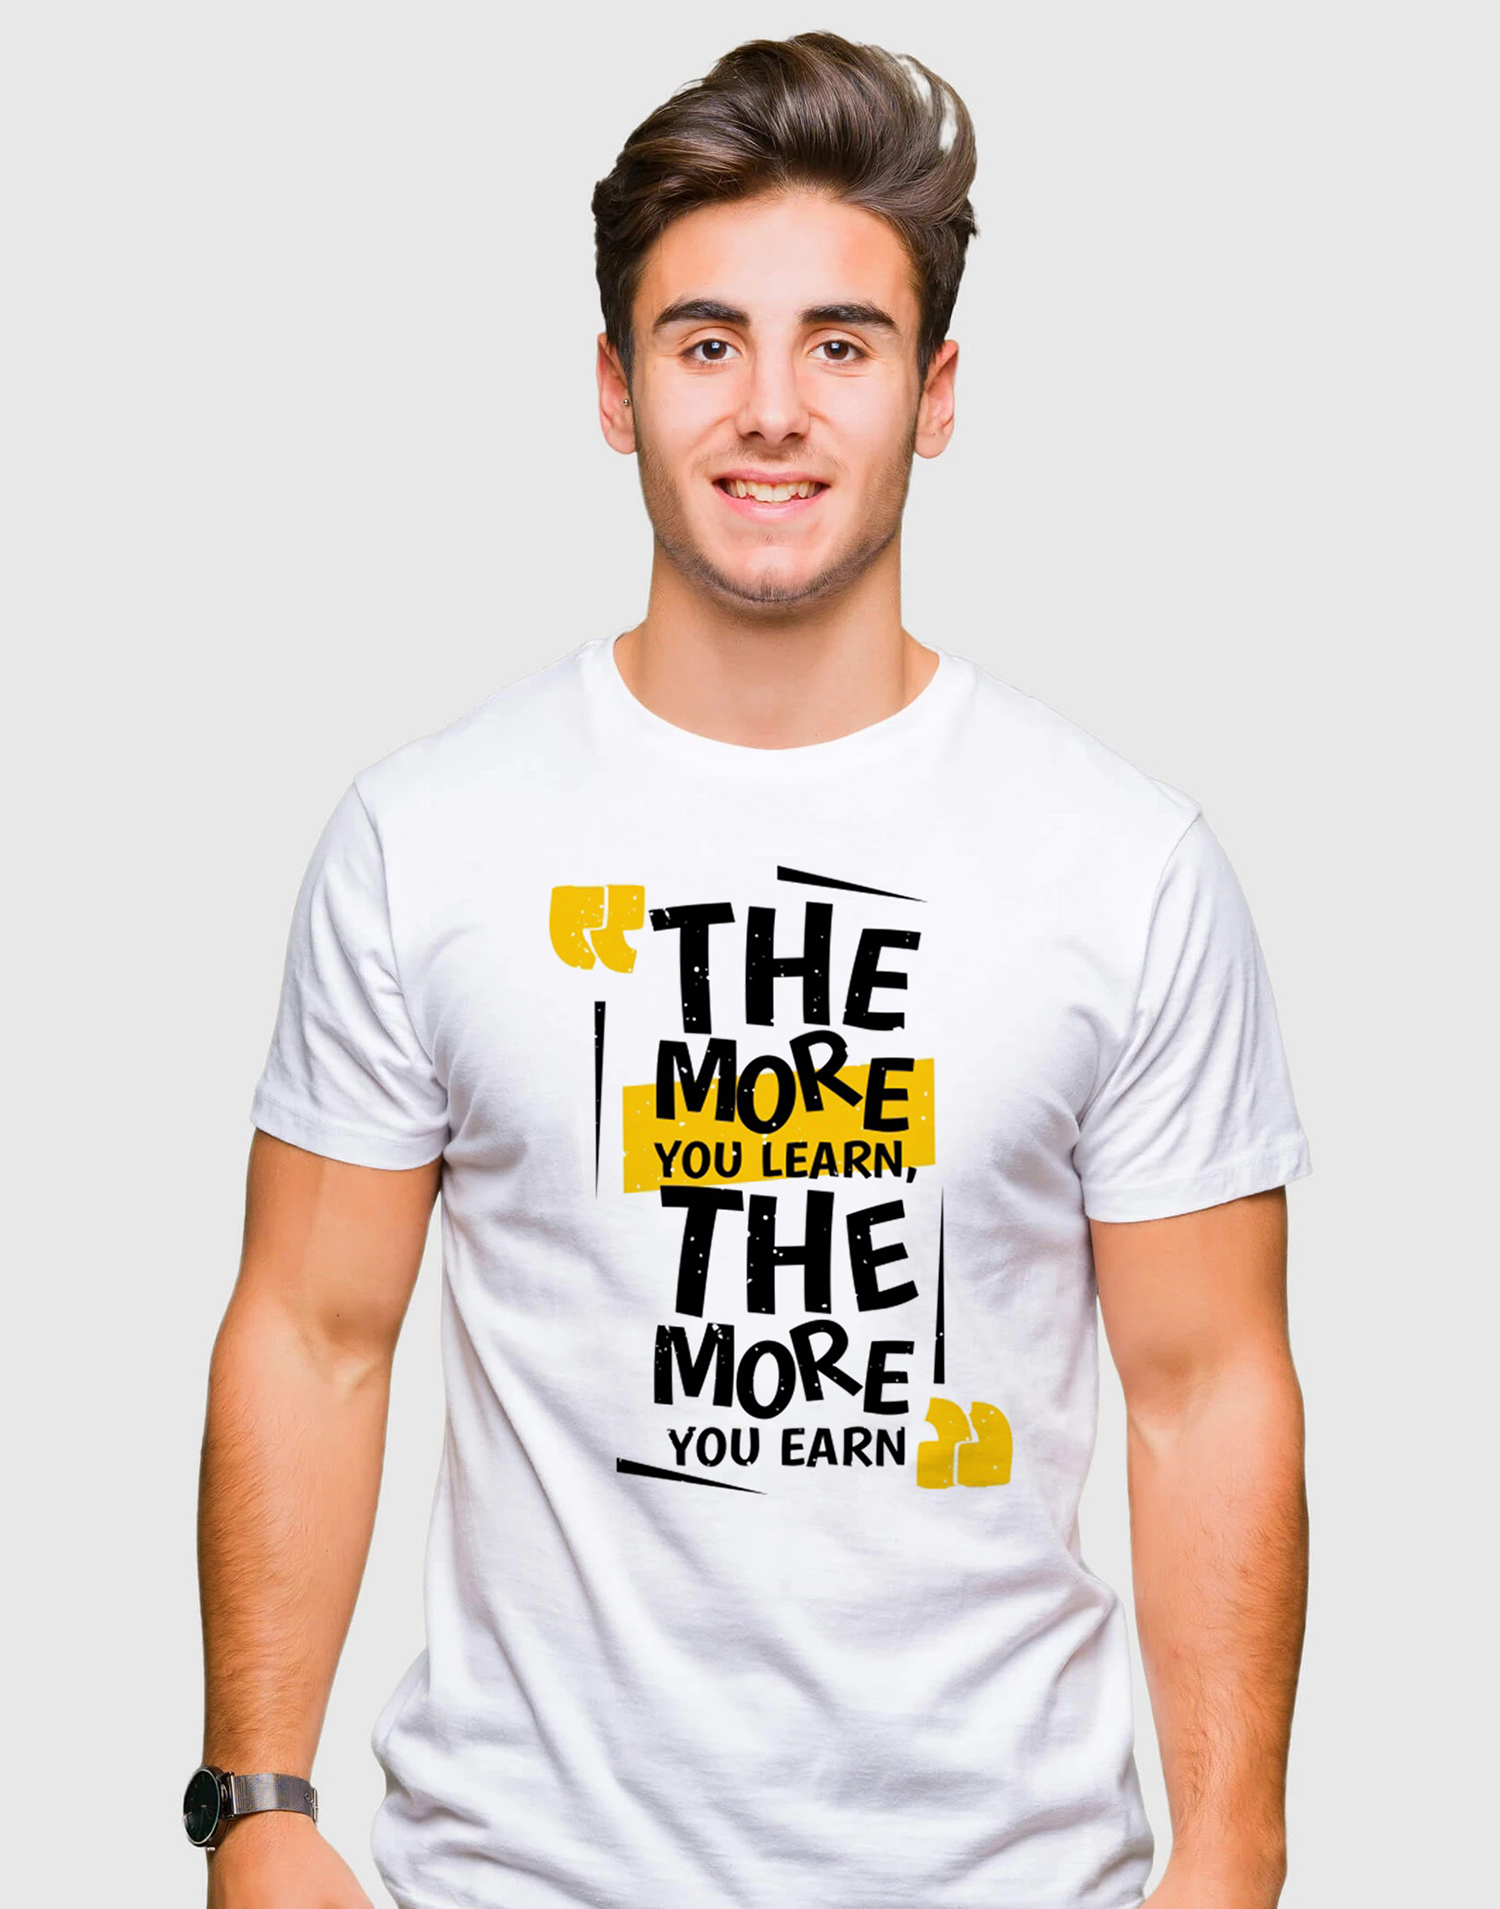 Kapdewala | Buy Best Graphic T-shirt Online in India